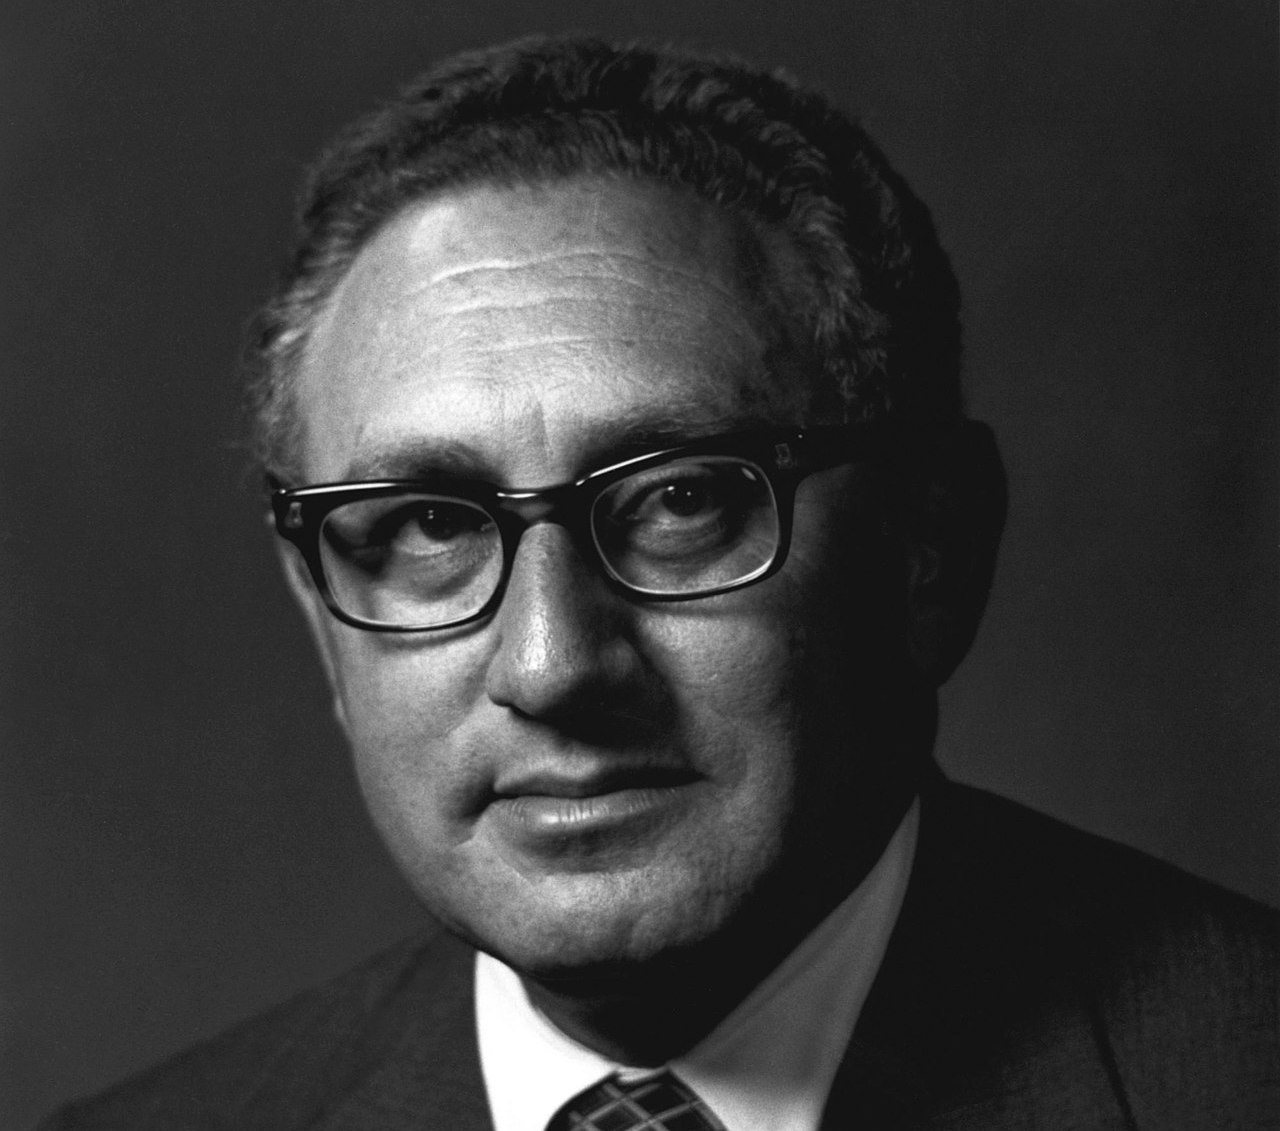  Henry Kissinger, war criminal who aided Pakistan in 1971 Bengali genocide in Bangladesh and called Indira Gandhi bitch, dies at 100